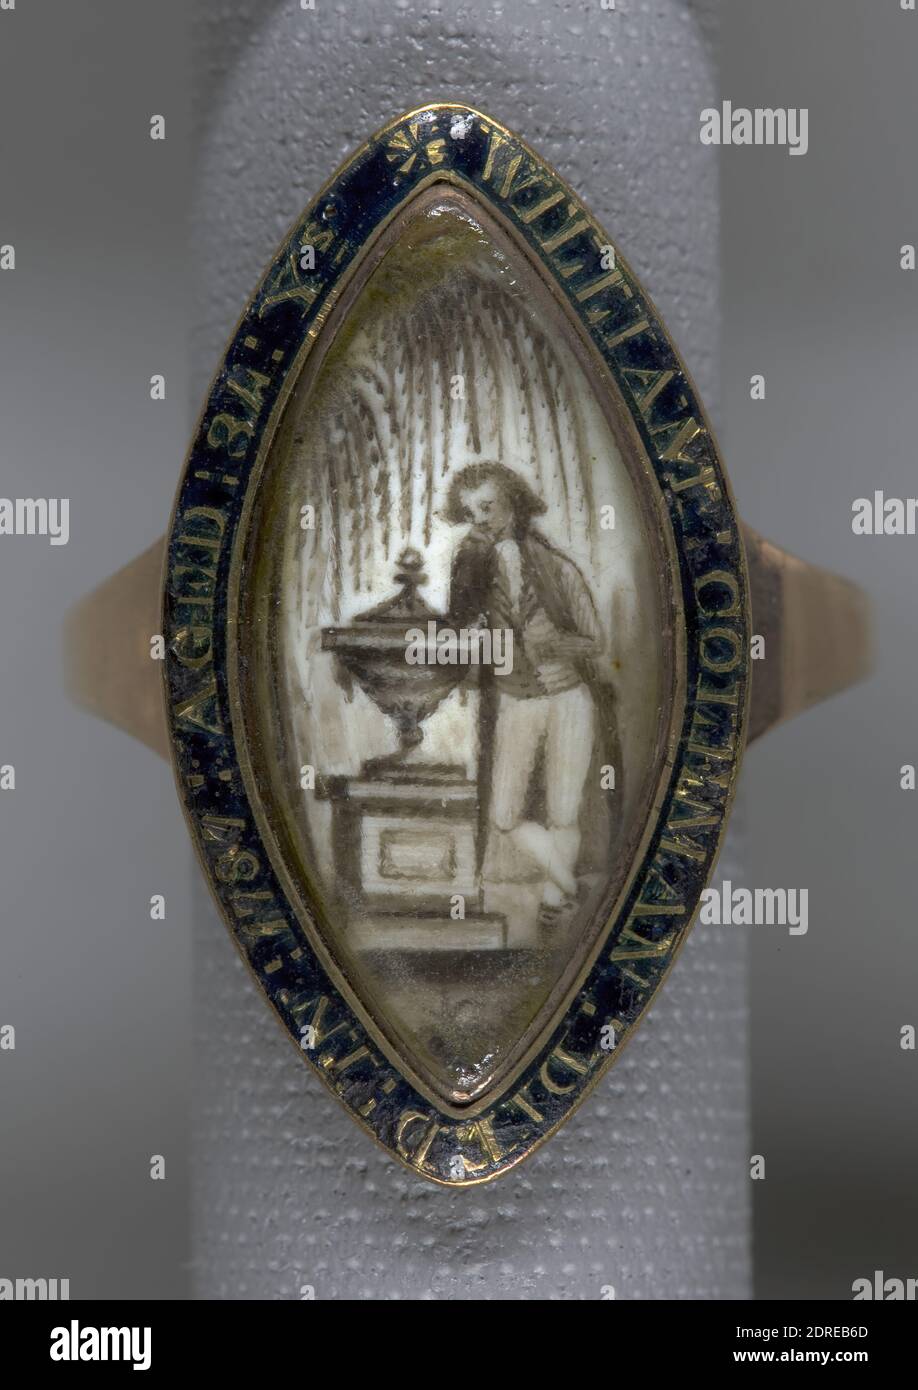 Mourning Ring for William Coleman (c. 1753-1787), Watercolor on ivory, 7/8 × 7/16 in. (2.2 × 1.1 cm), American, 18th century, Miniatures - Jewelry Stock Photo